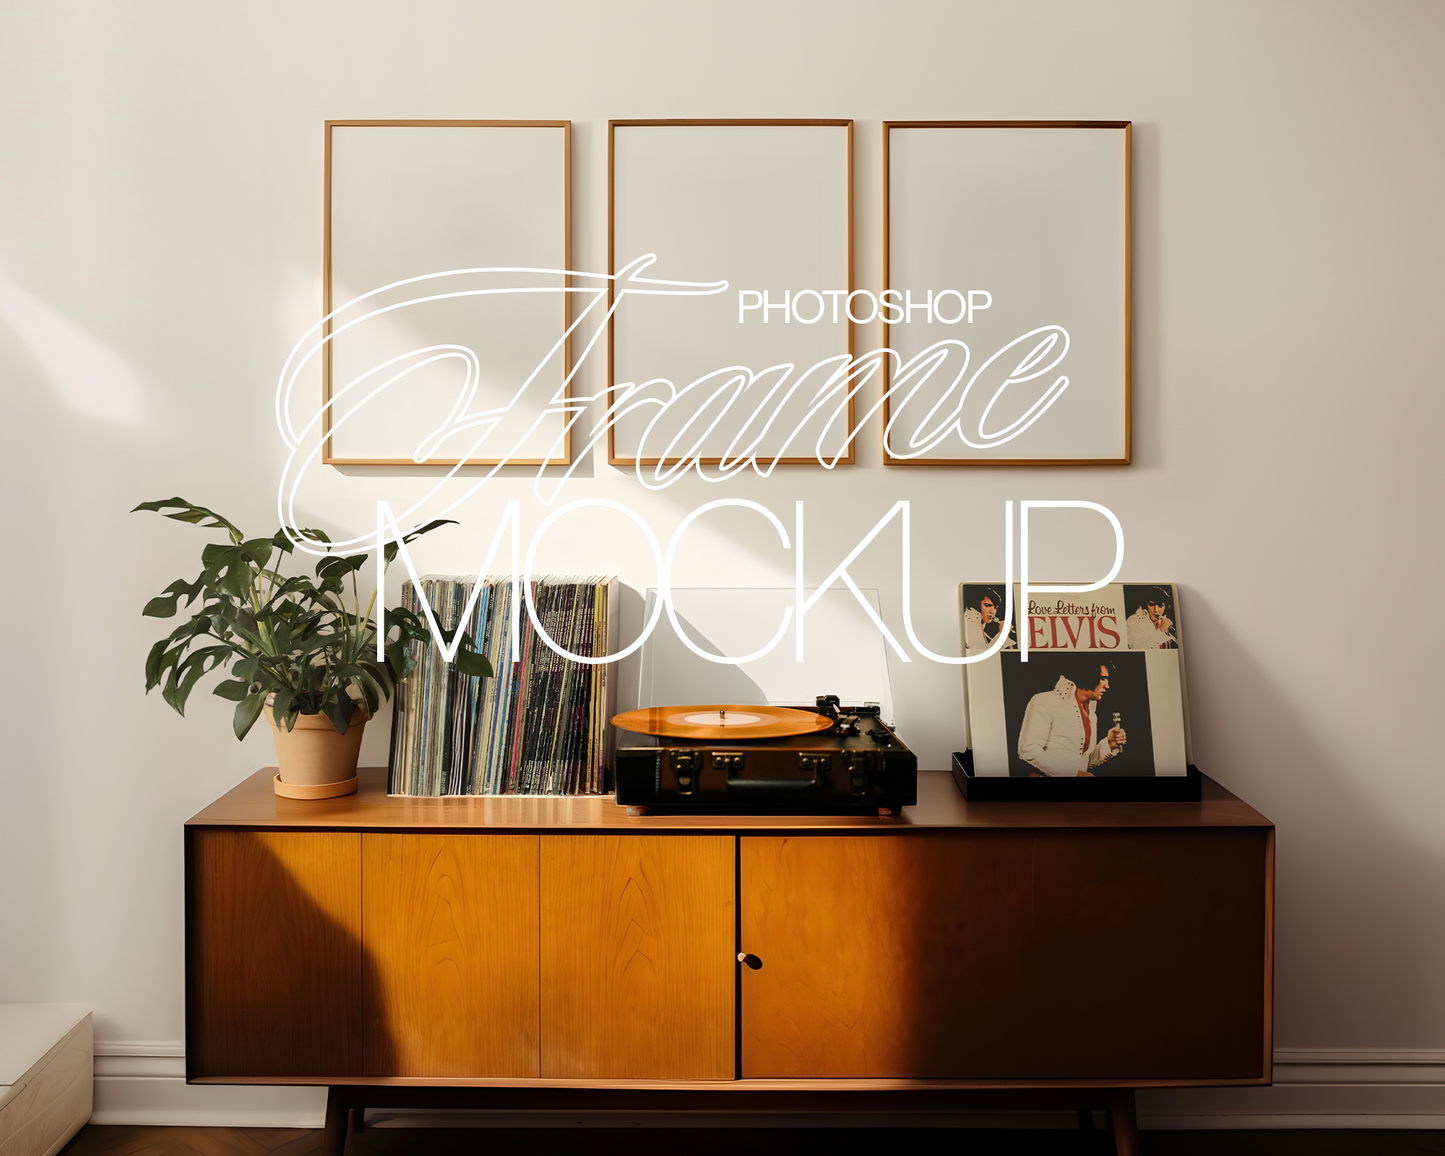 Three DIN A Frames and Vinyl Cover Mockup